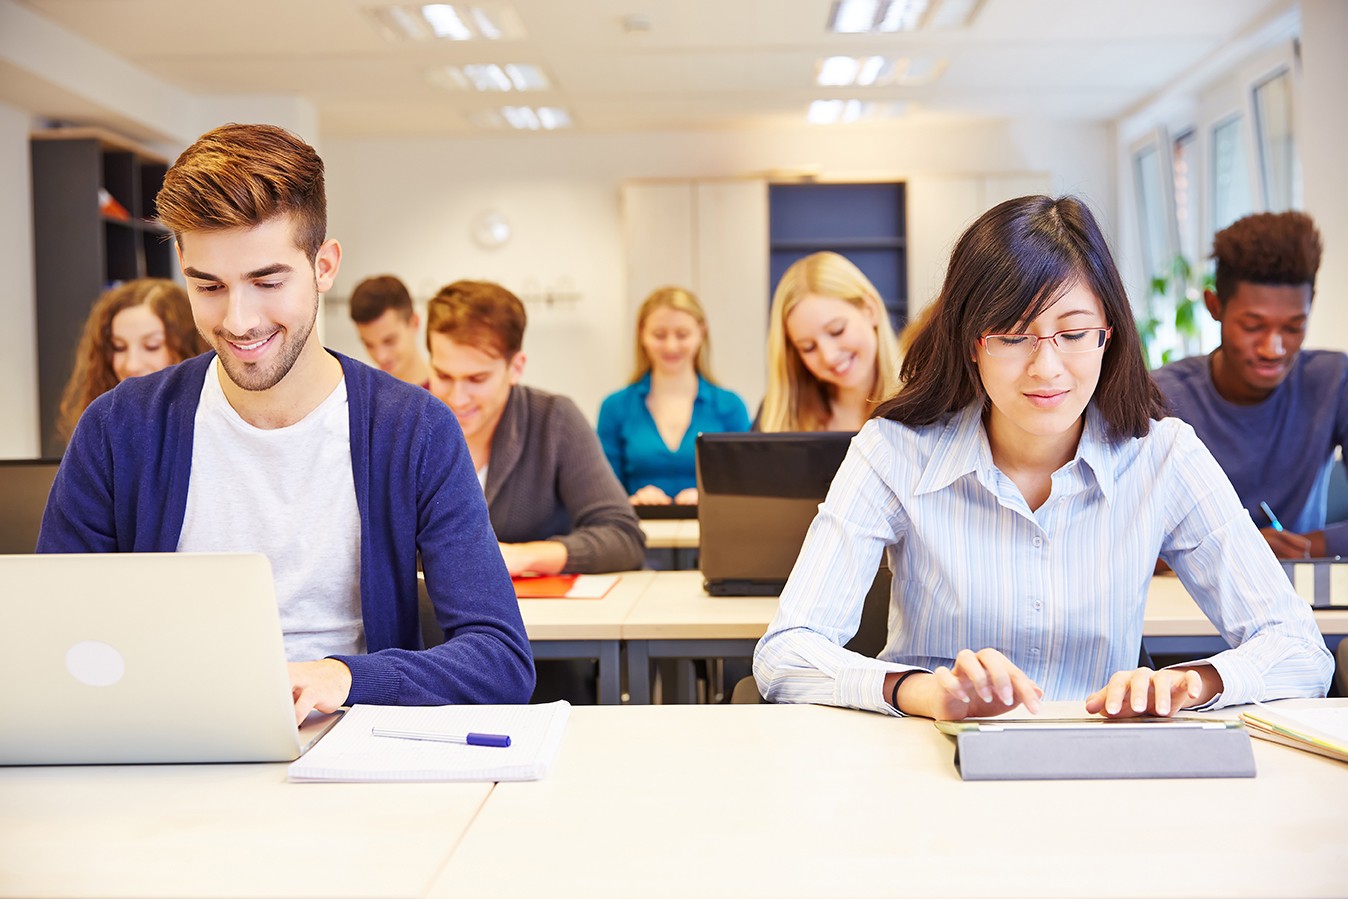 Why Should Colleges and Universities Develop eLearning Programs?